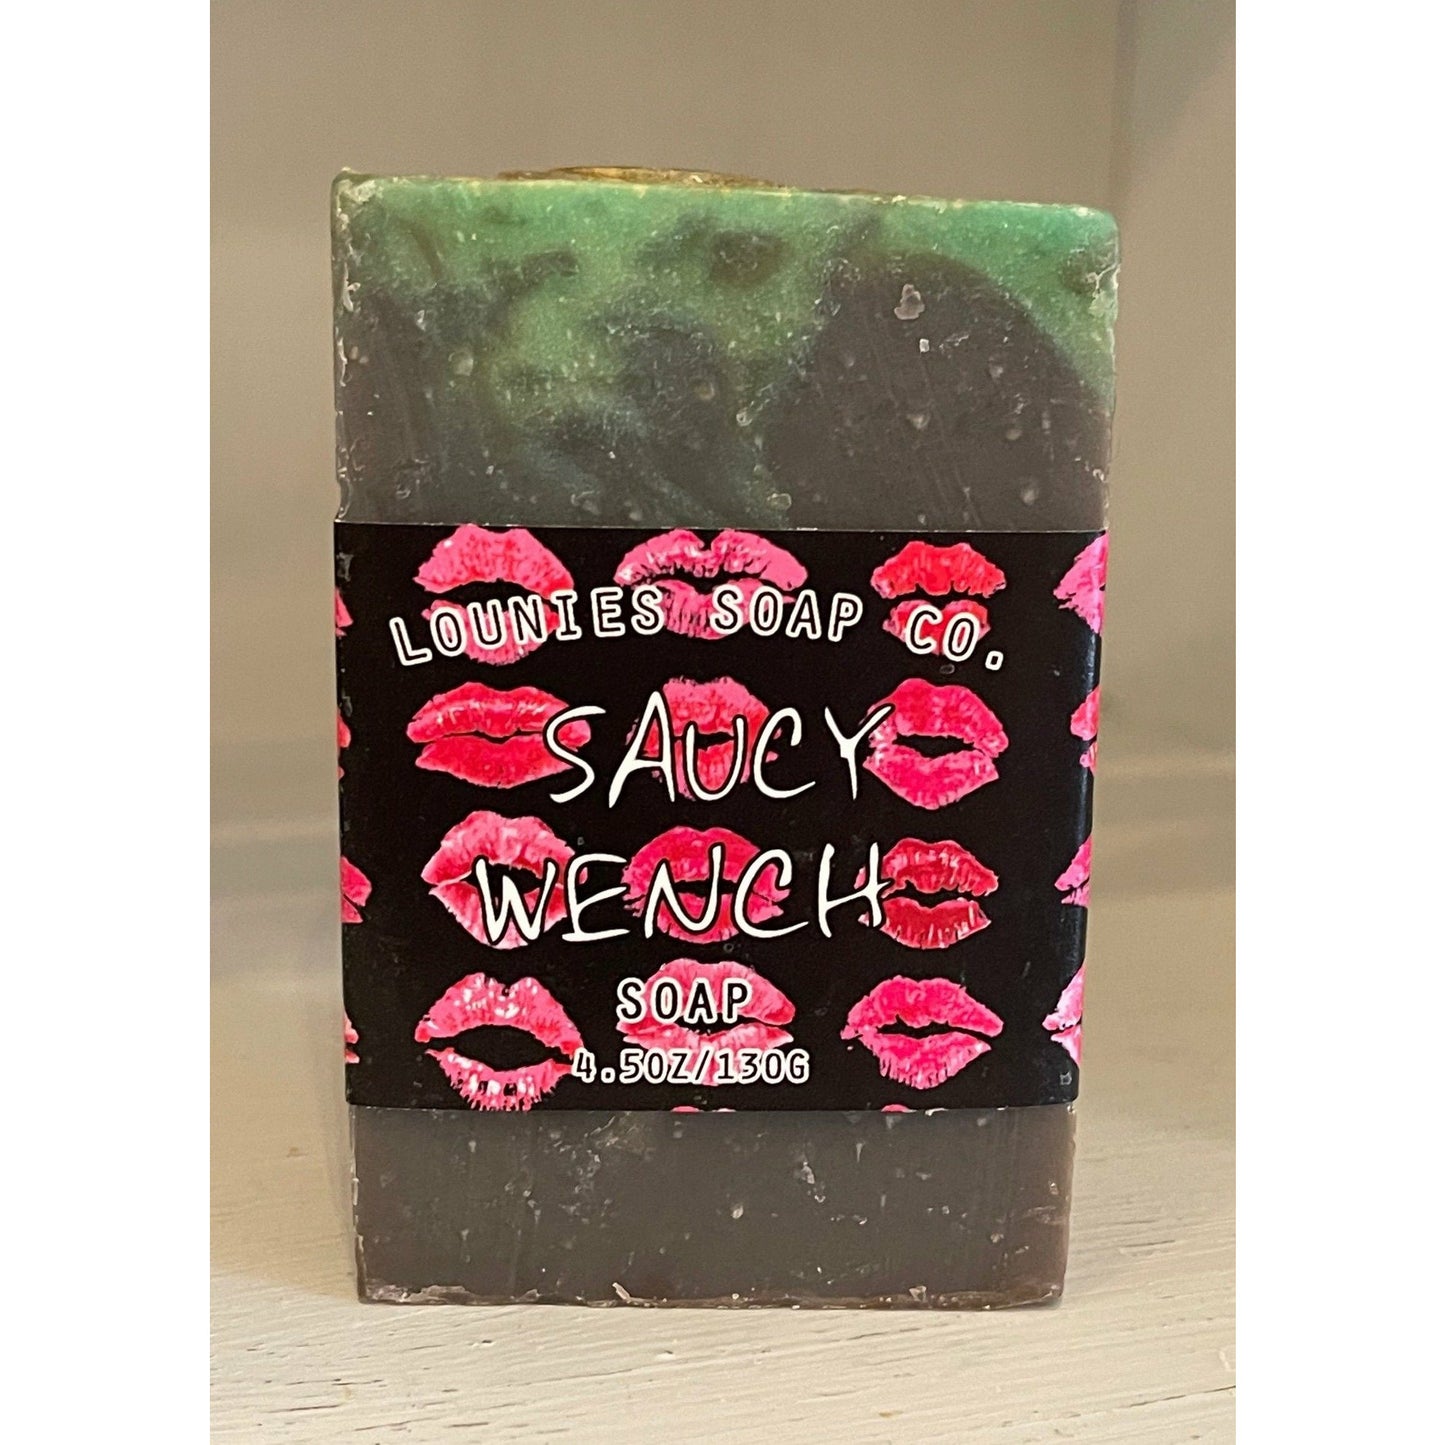 Saucy Wench Soap